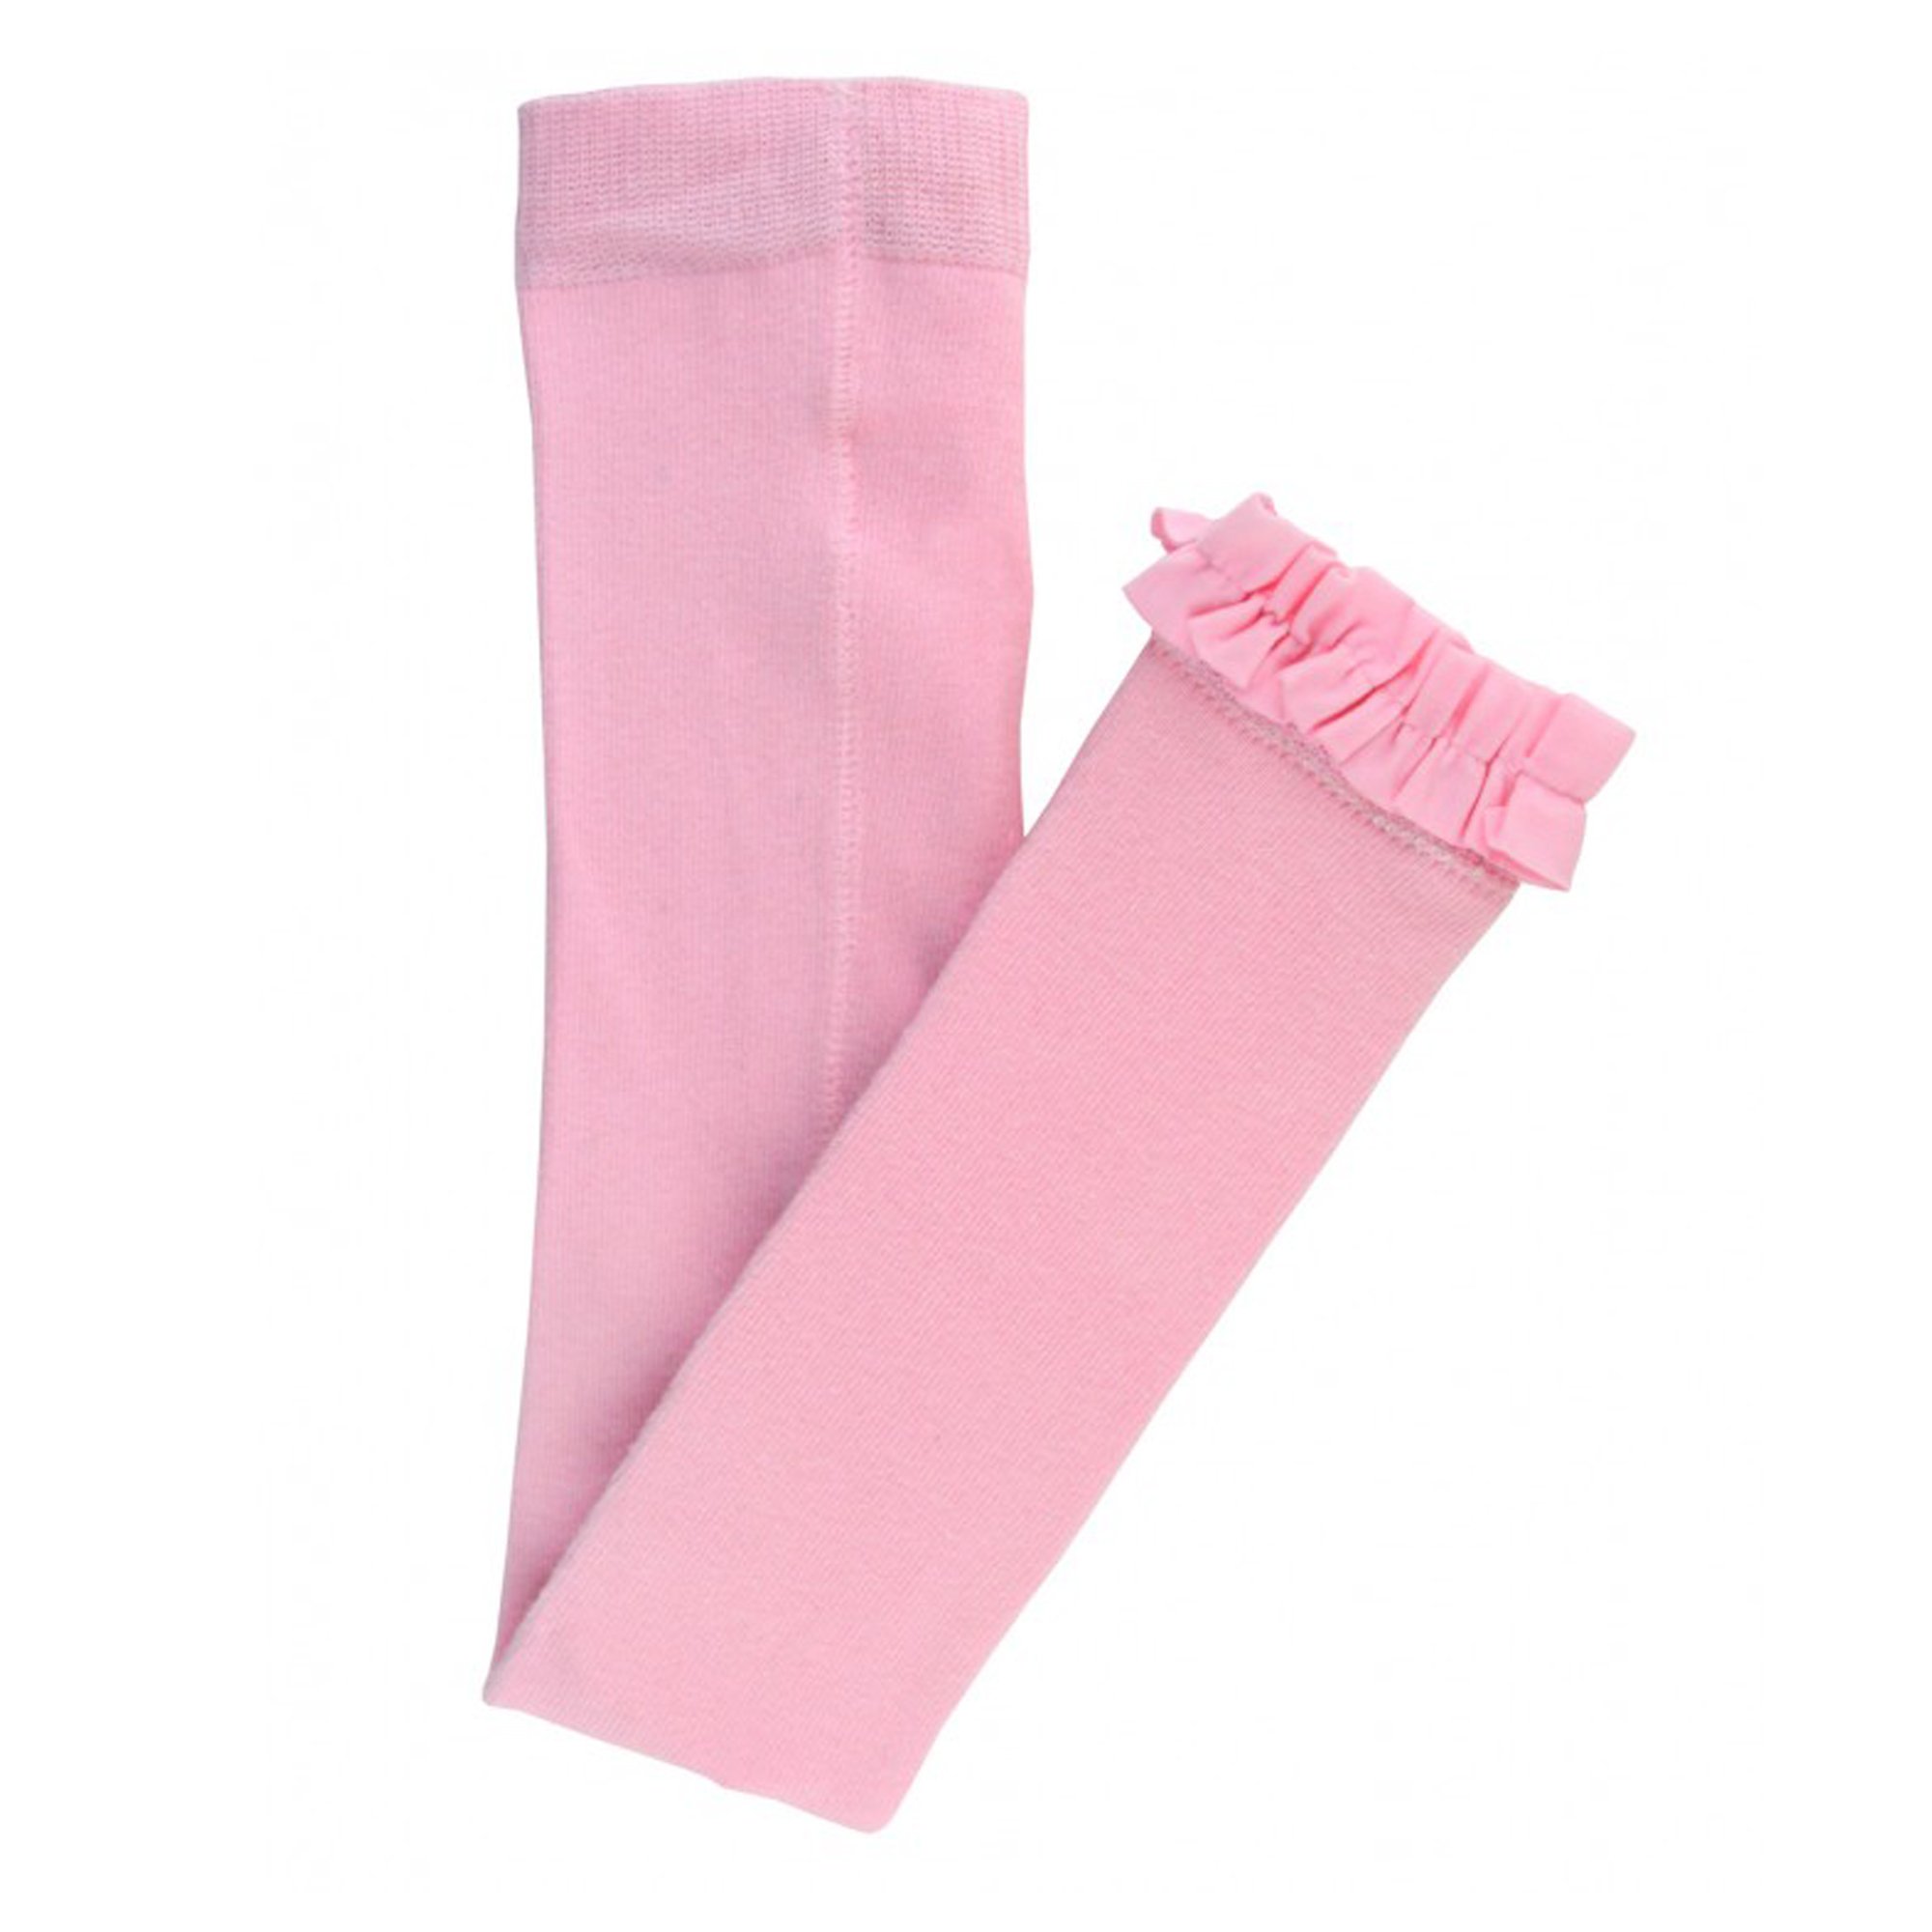 Cute Cotton Ruffle Footless Tights for Kids - Shop Now at Bellaboo